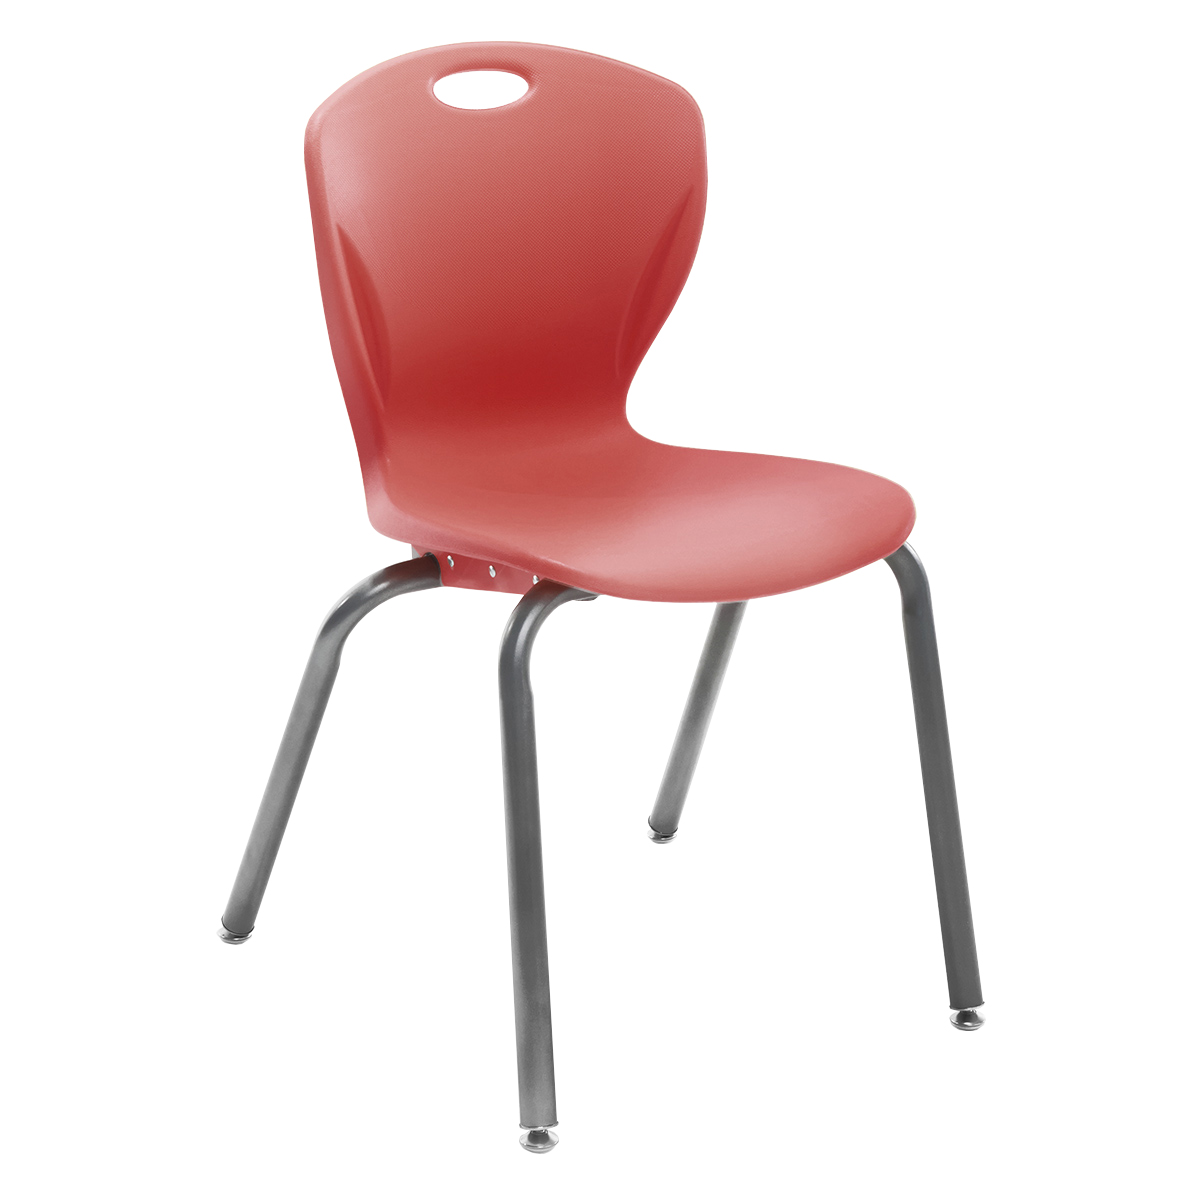 Artcobell Discover 18″ A+ Four Leg Stacking Chair